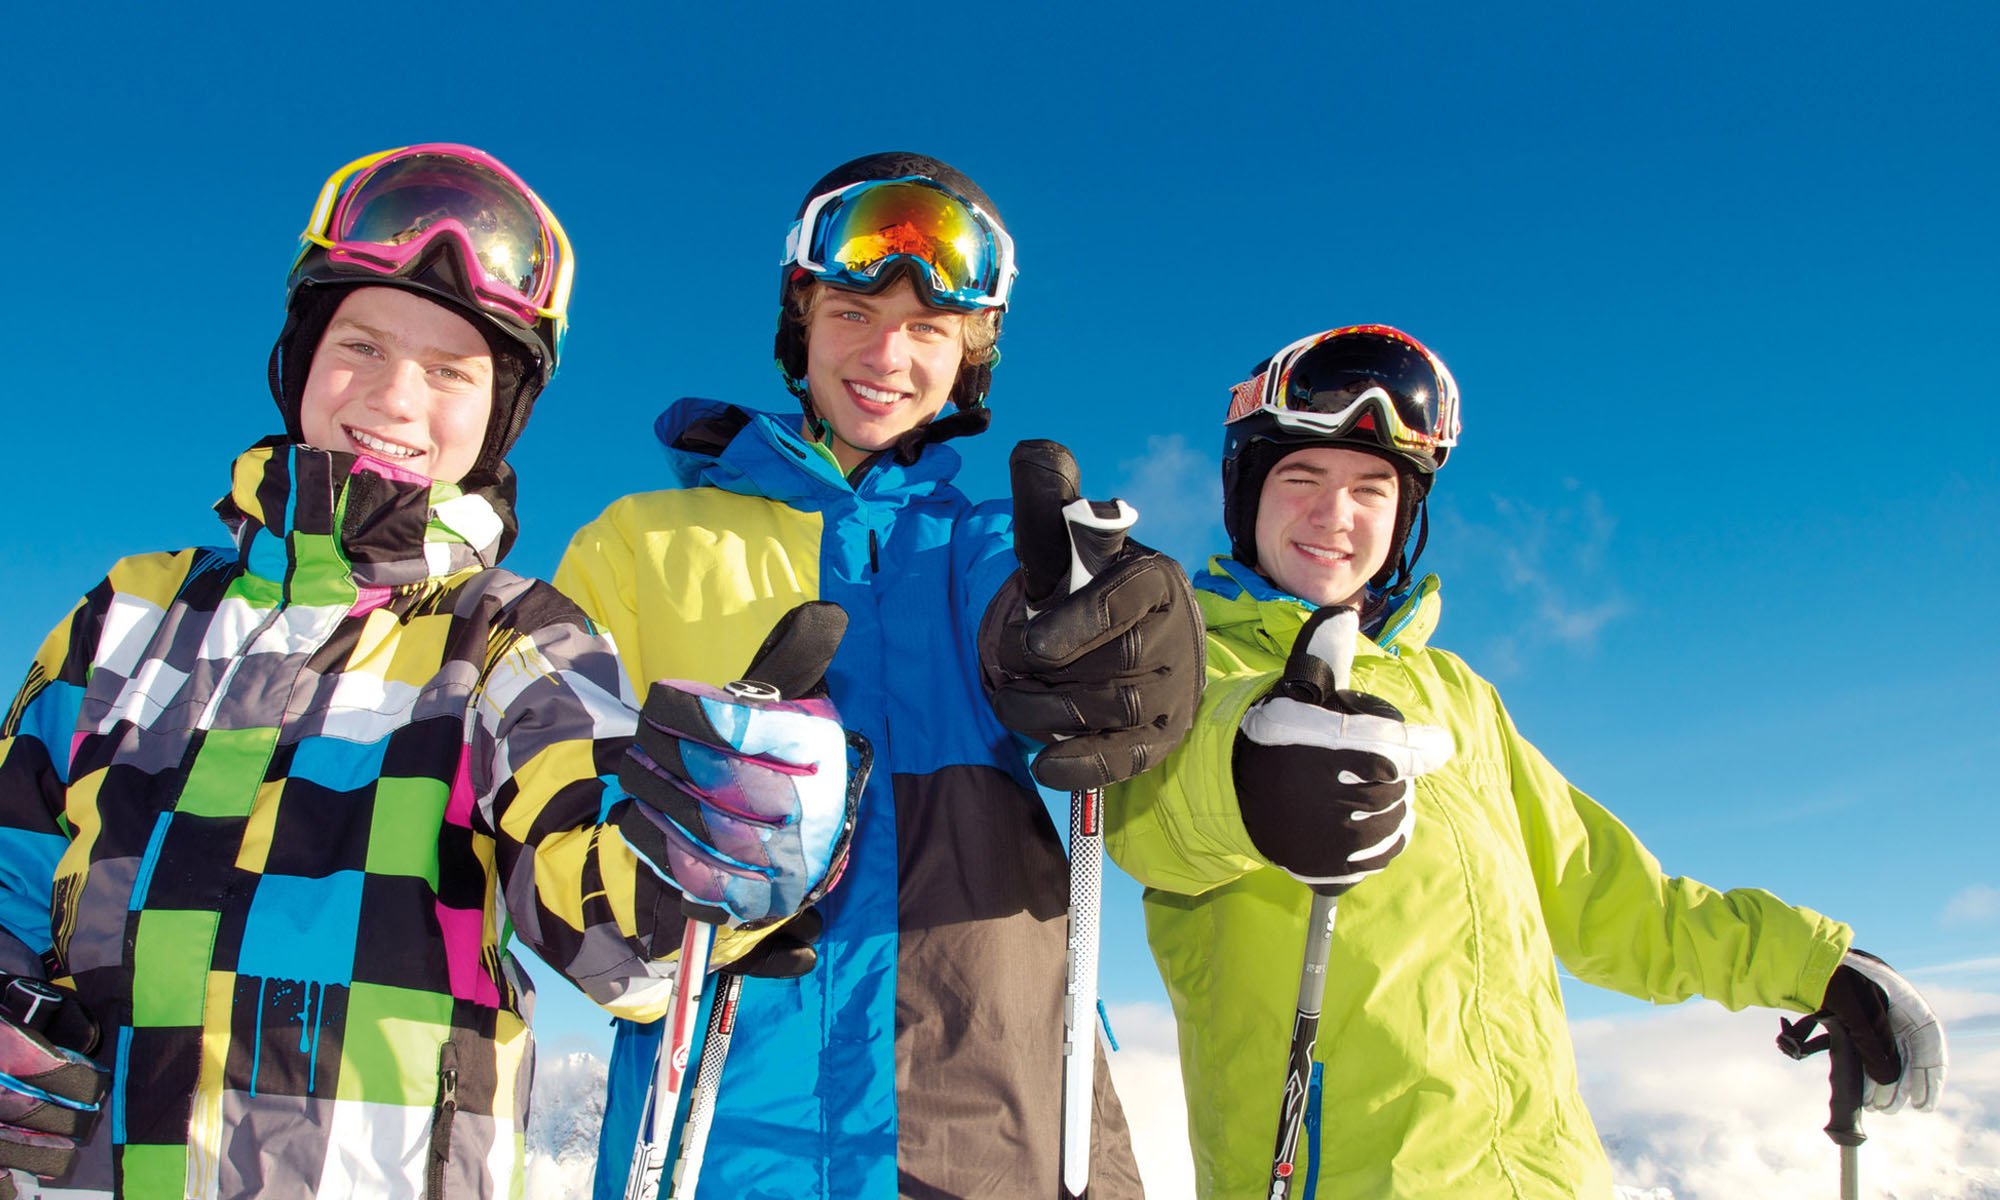 A group of teenage skiers giving a thumbs up.